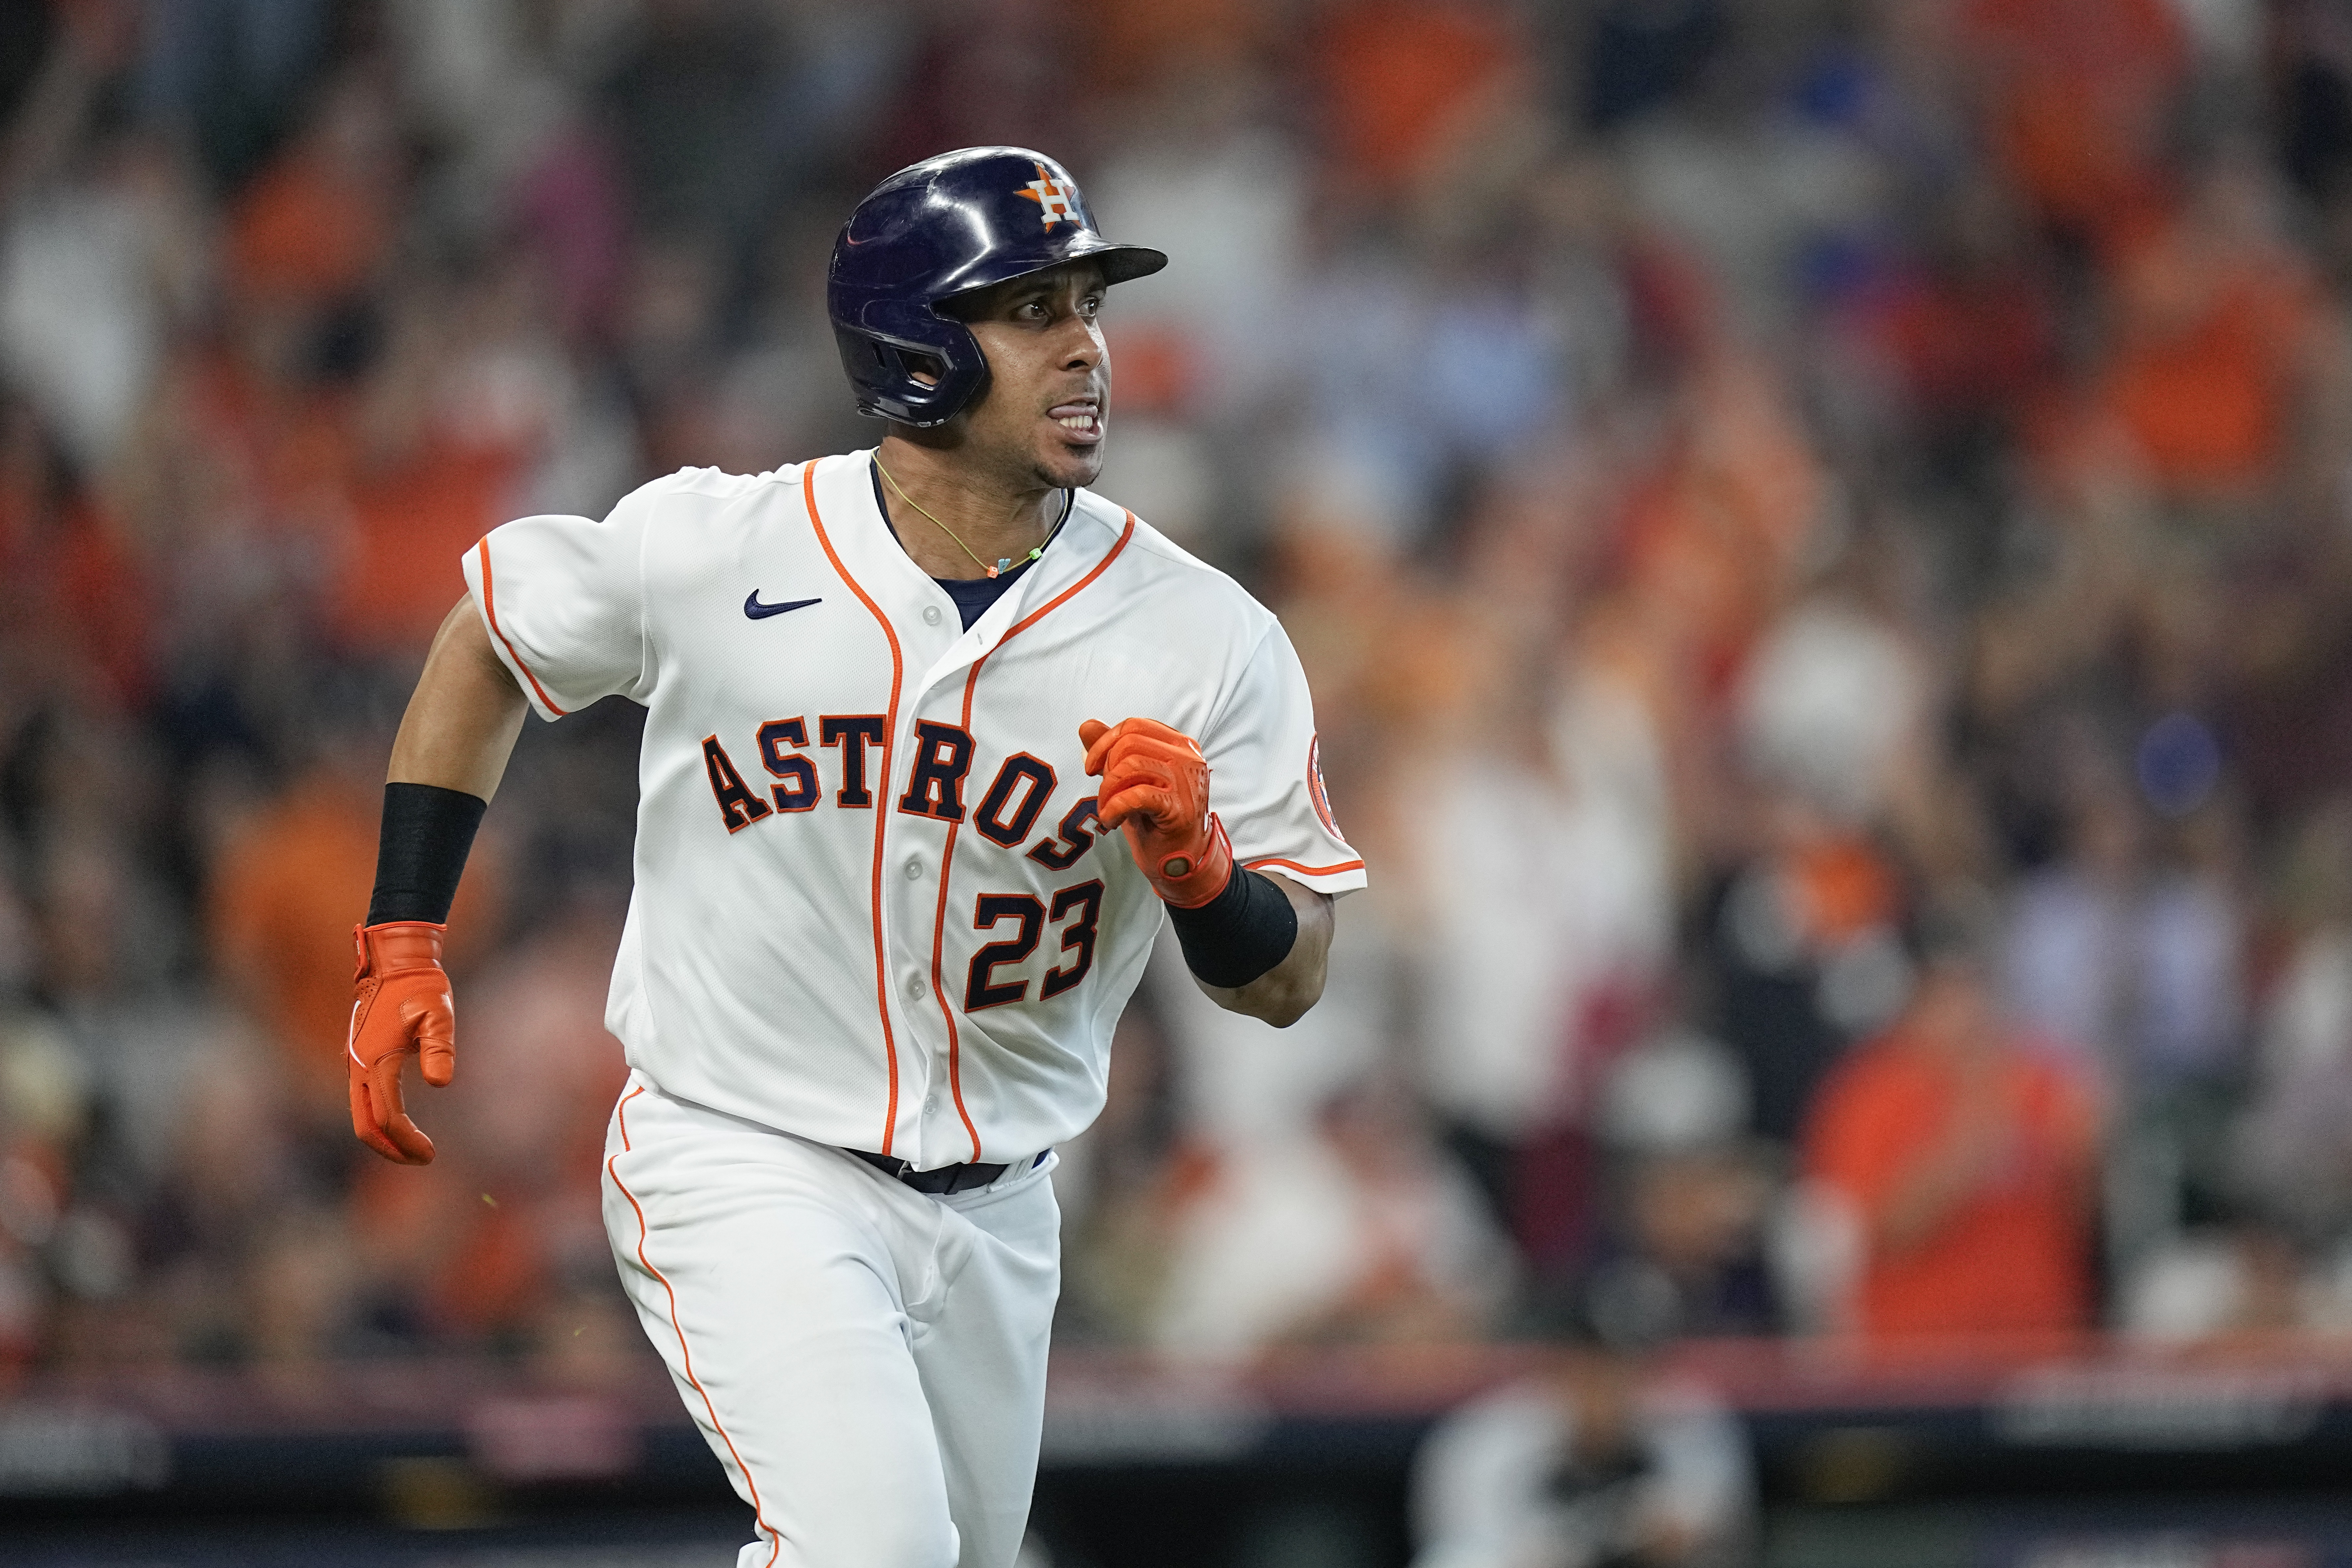 Astros' Michael Brantley to miss rest of season due to shoulder surgery